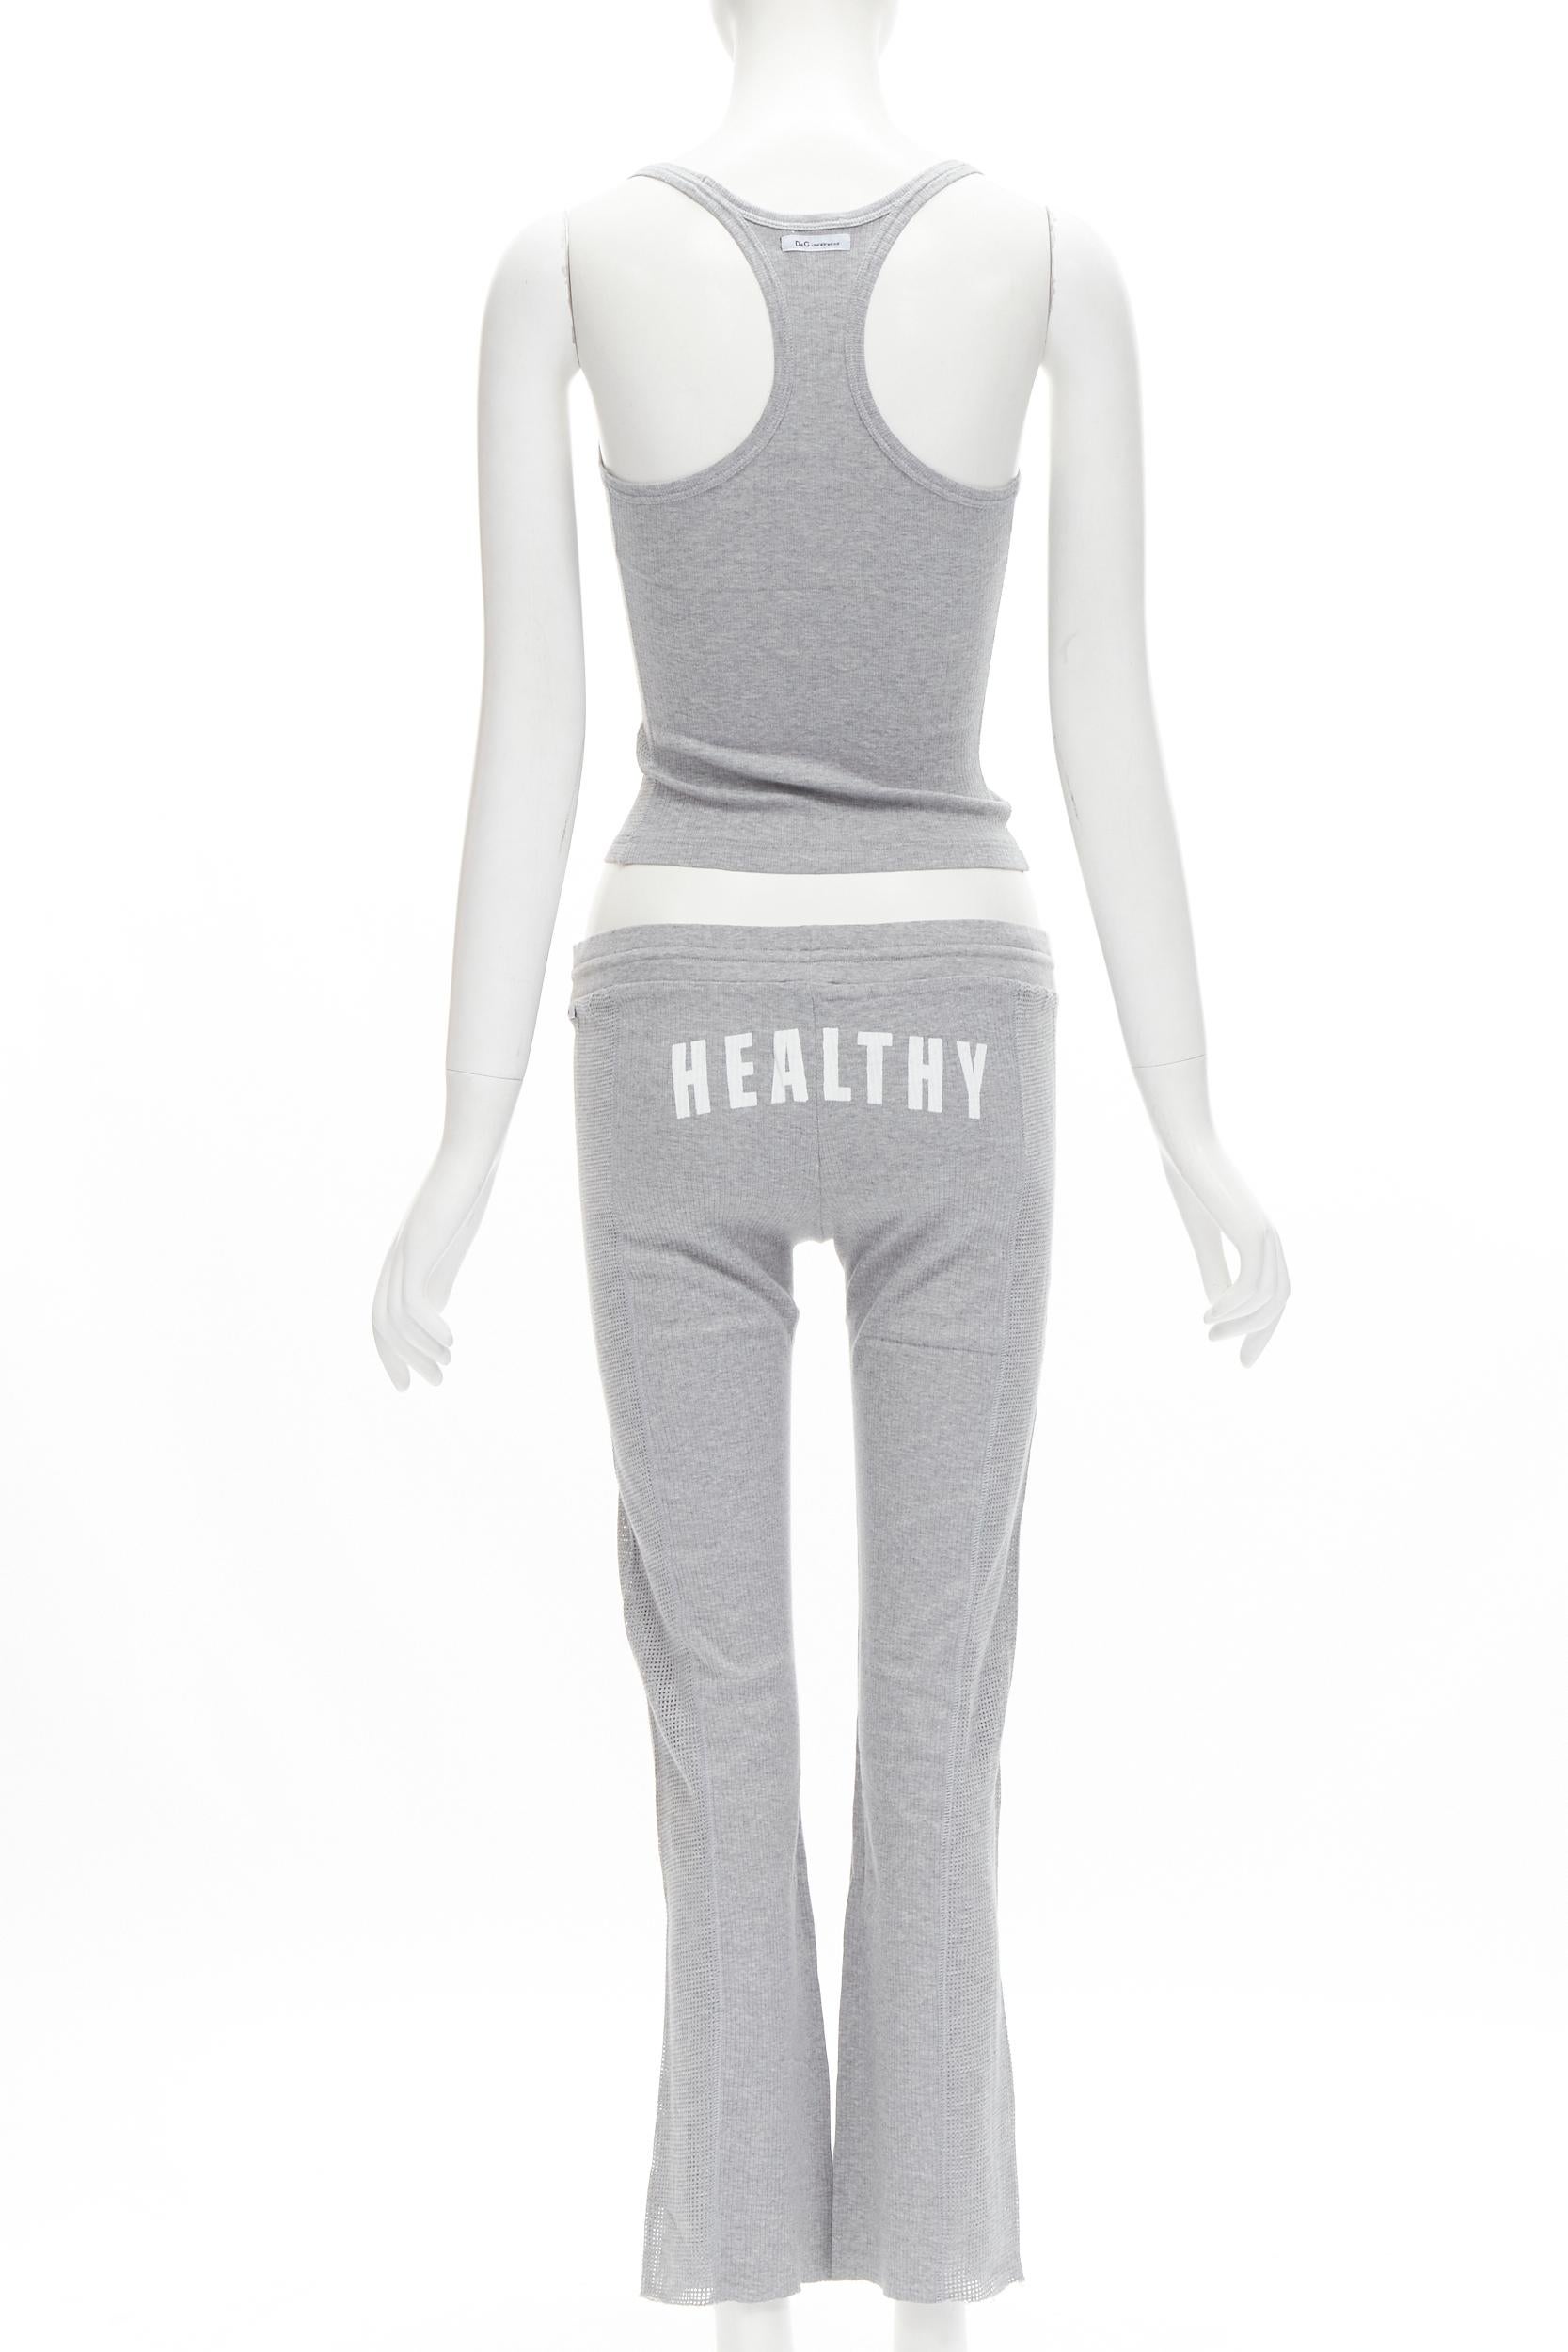 D&G DOLCE GABBANA Vintage Y2K HEALTHY grey ribbed tank top sweat pants
Reference: ANWU/A00623
Brand: D&G
Designer: Domenico Dolce and Stefano Gabbana
Collection: HEALTHY
Material: Feels like cotton
Color: Grey
Pattern: Solid
Closure: